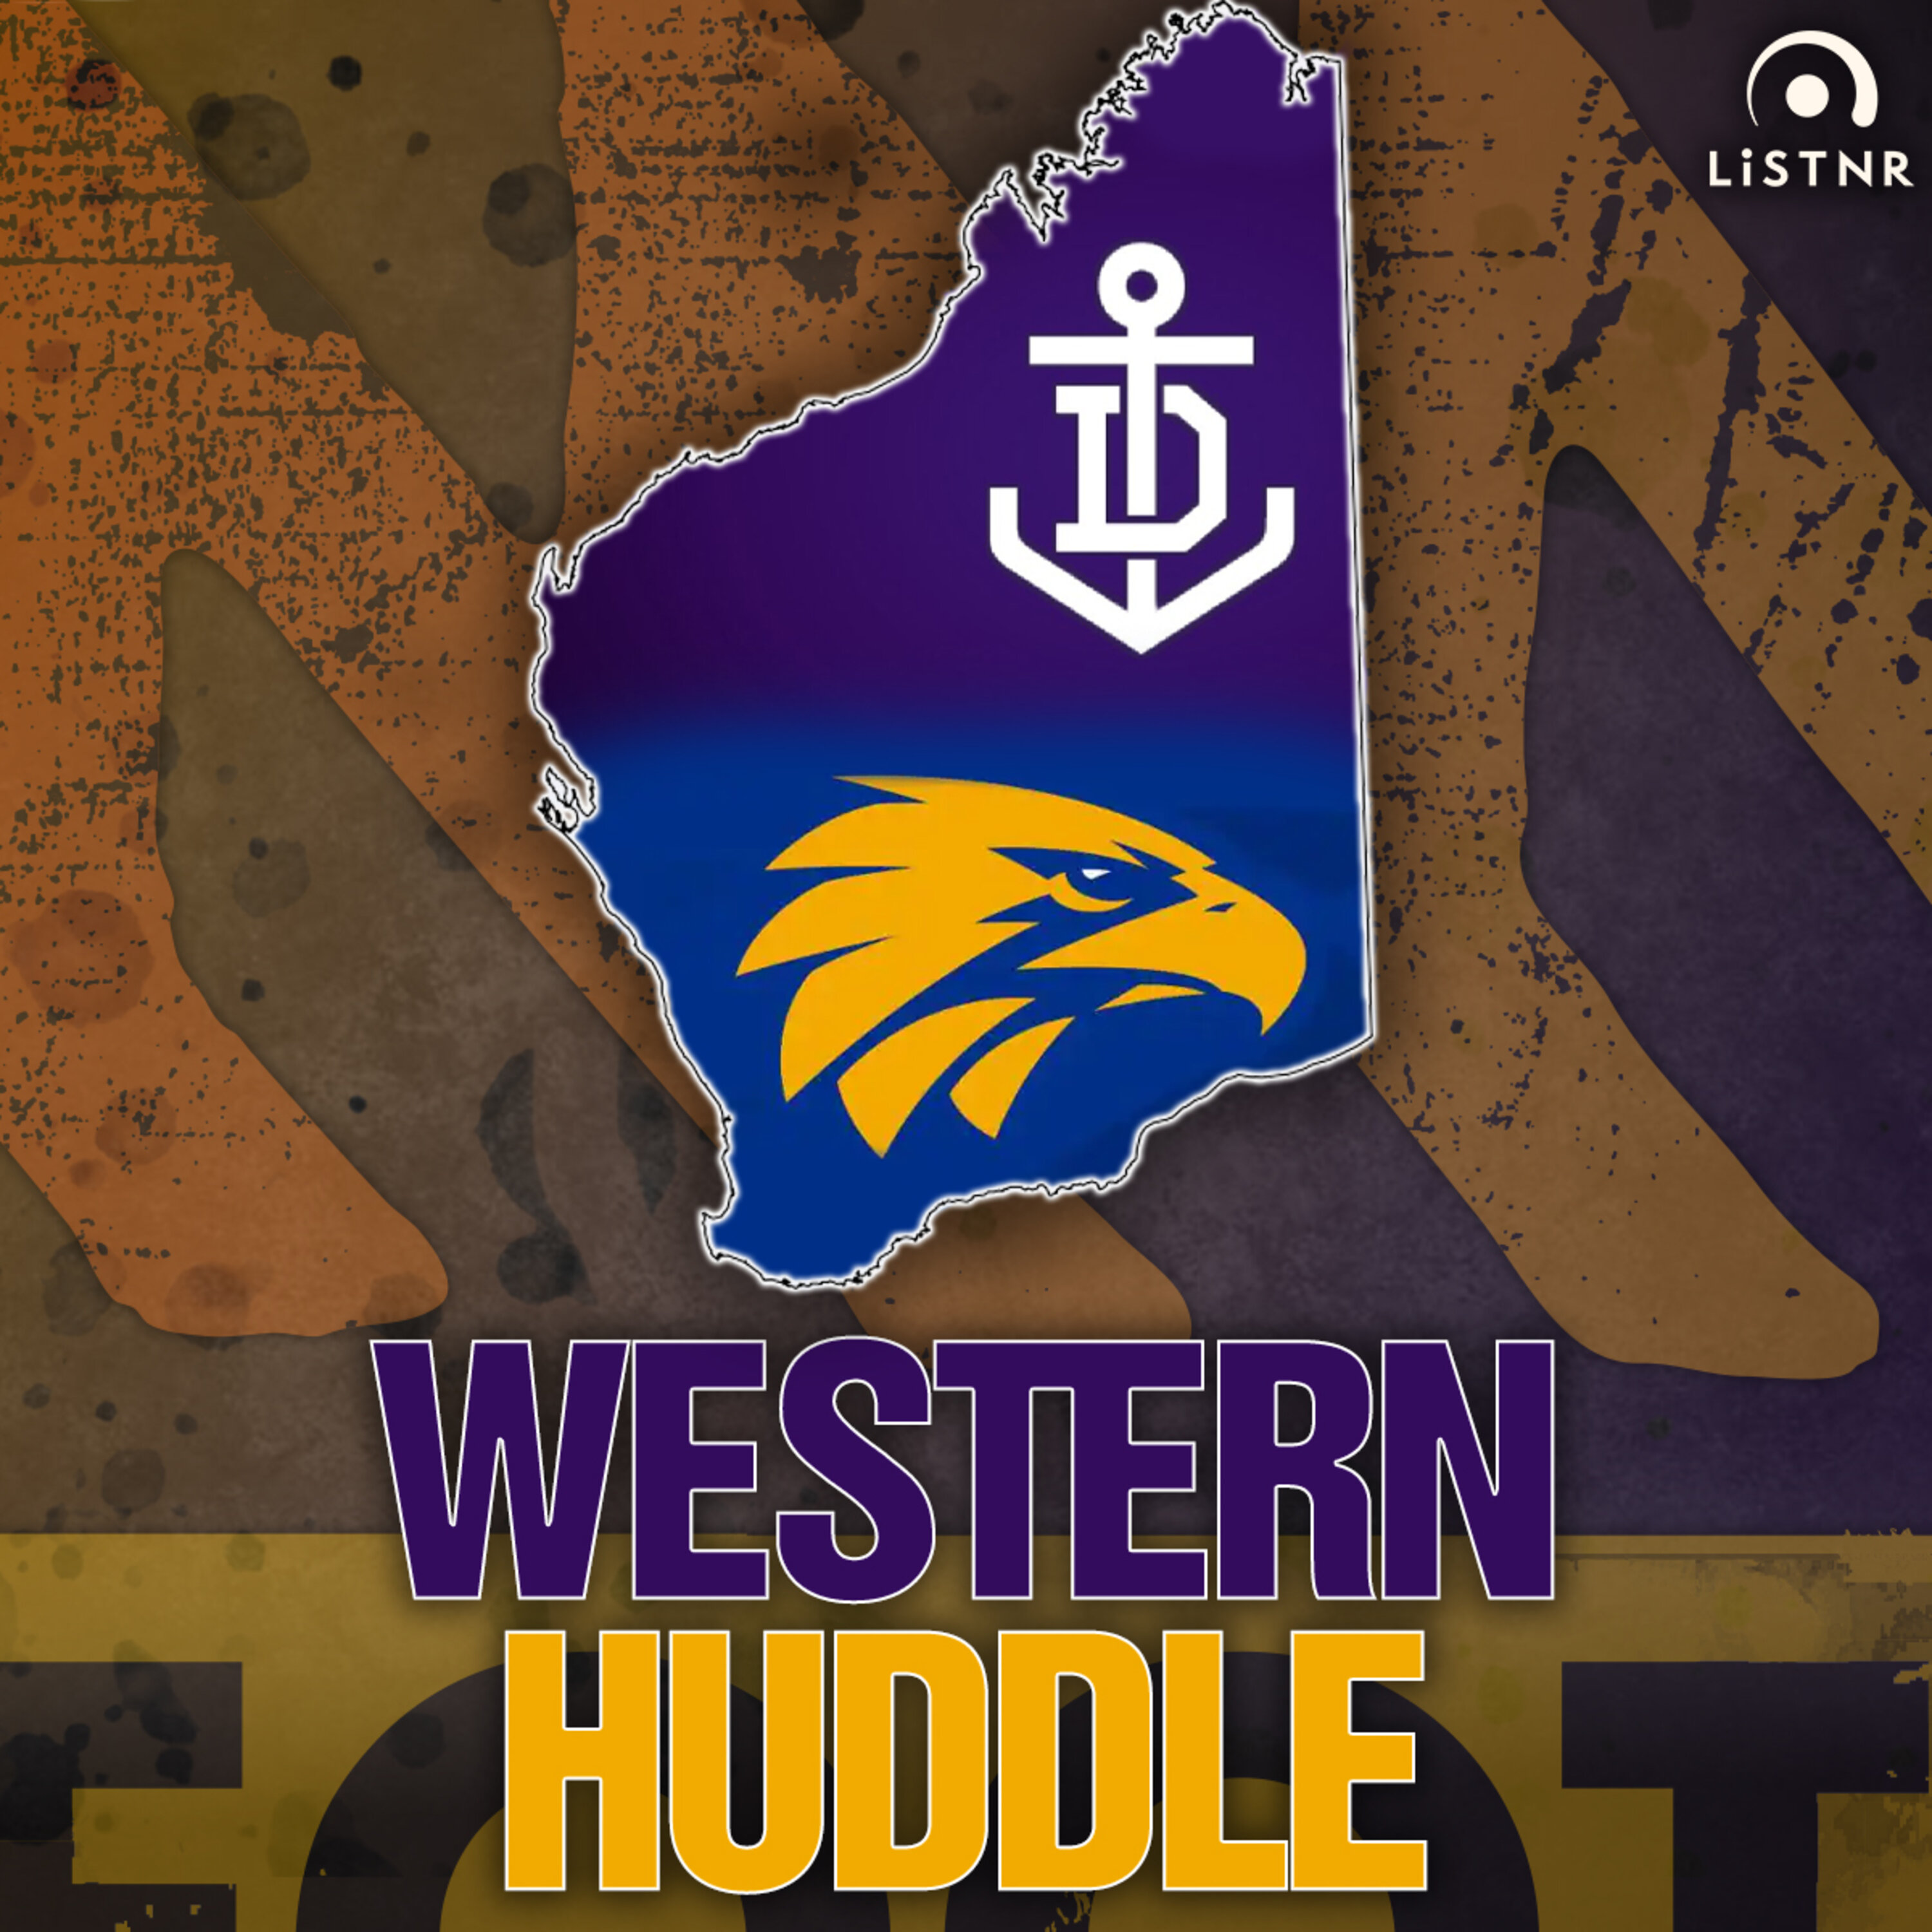 Western Huddle | Embers is back, Freo's comeback for the ages, how good can Jye "Nev" Amiss be, Fremantle v Collingwood preview